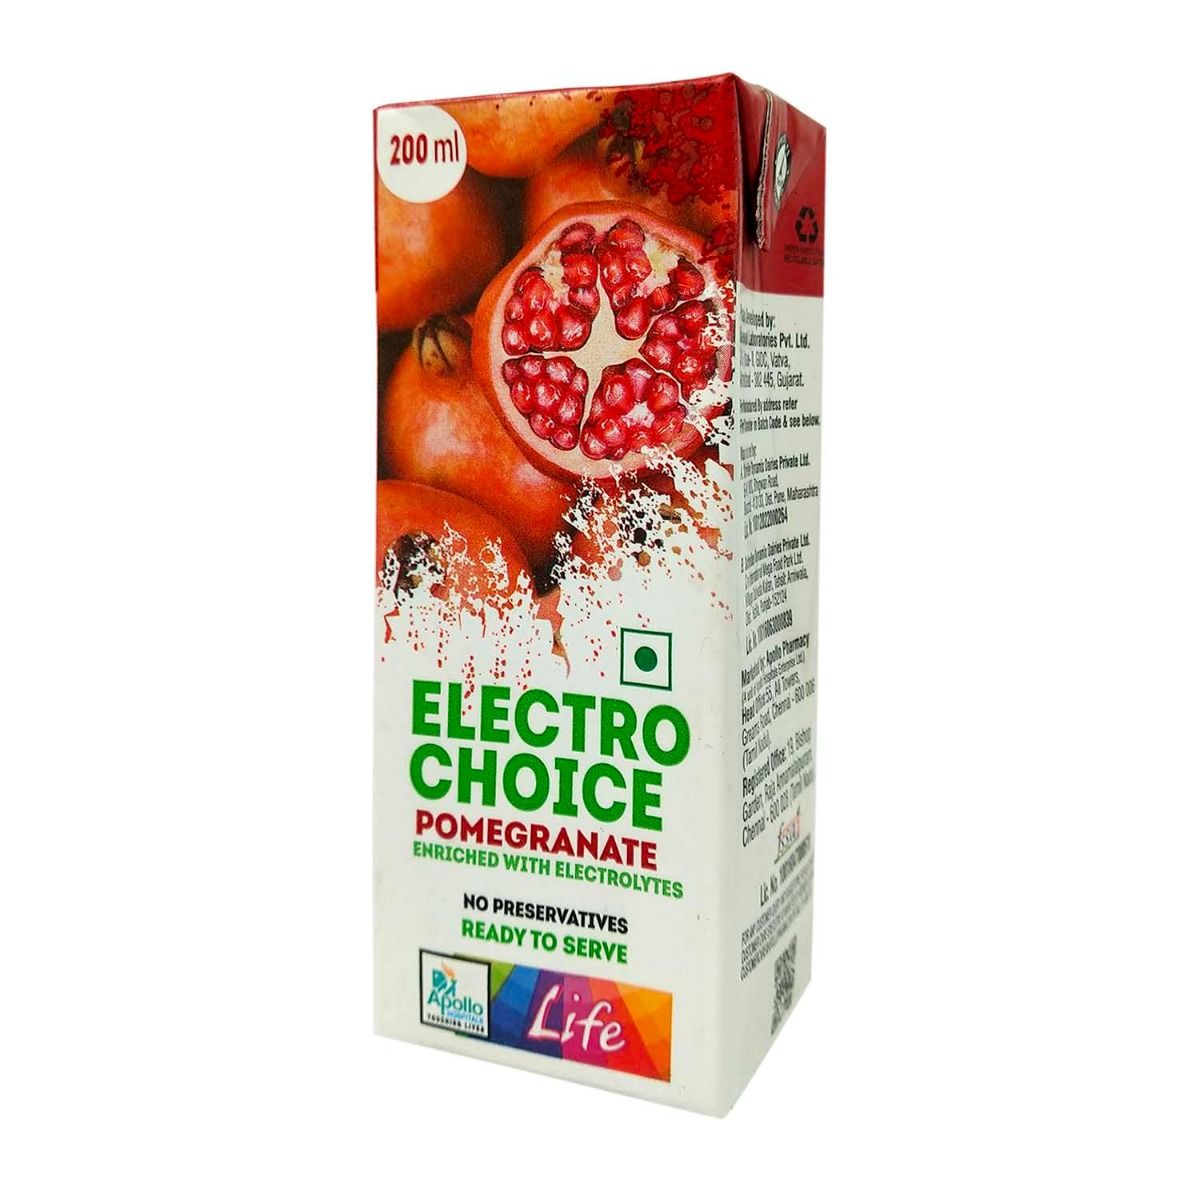 Buy Apollo Life Electro Choice Pomegranate Flavour Drink, 200 ml Online